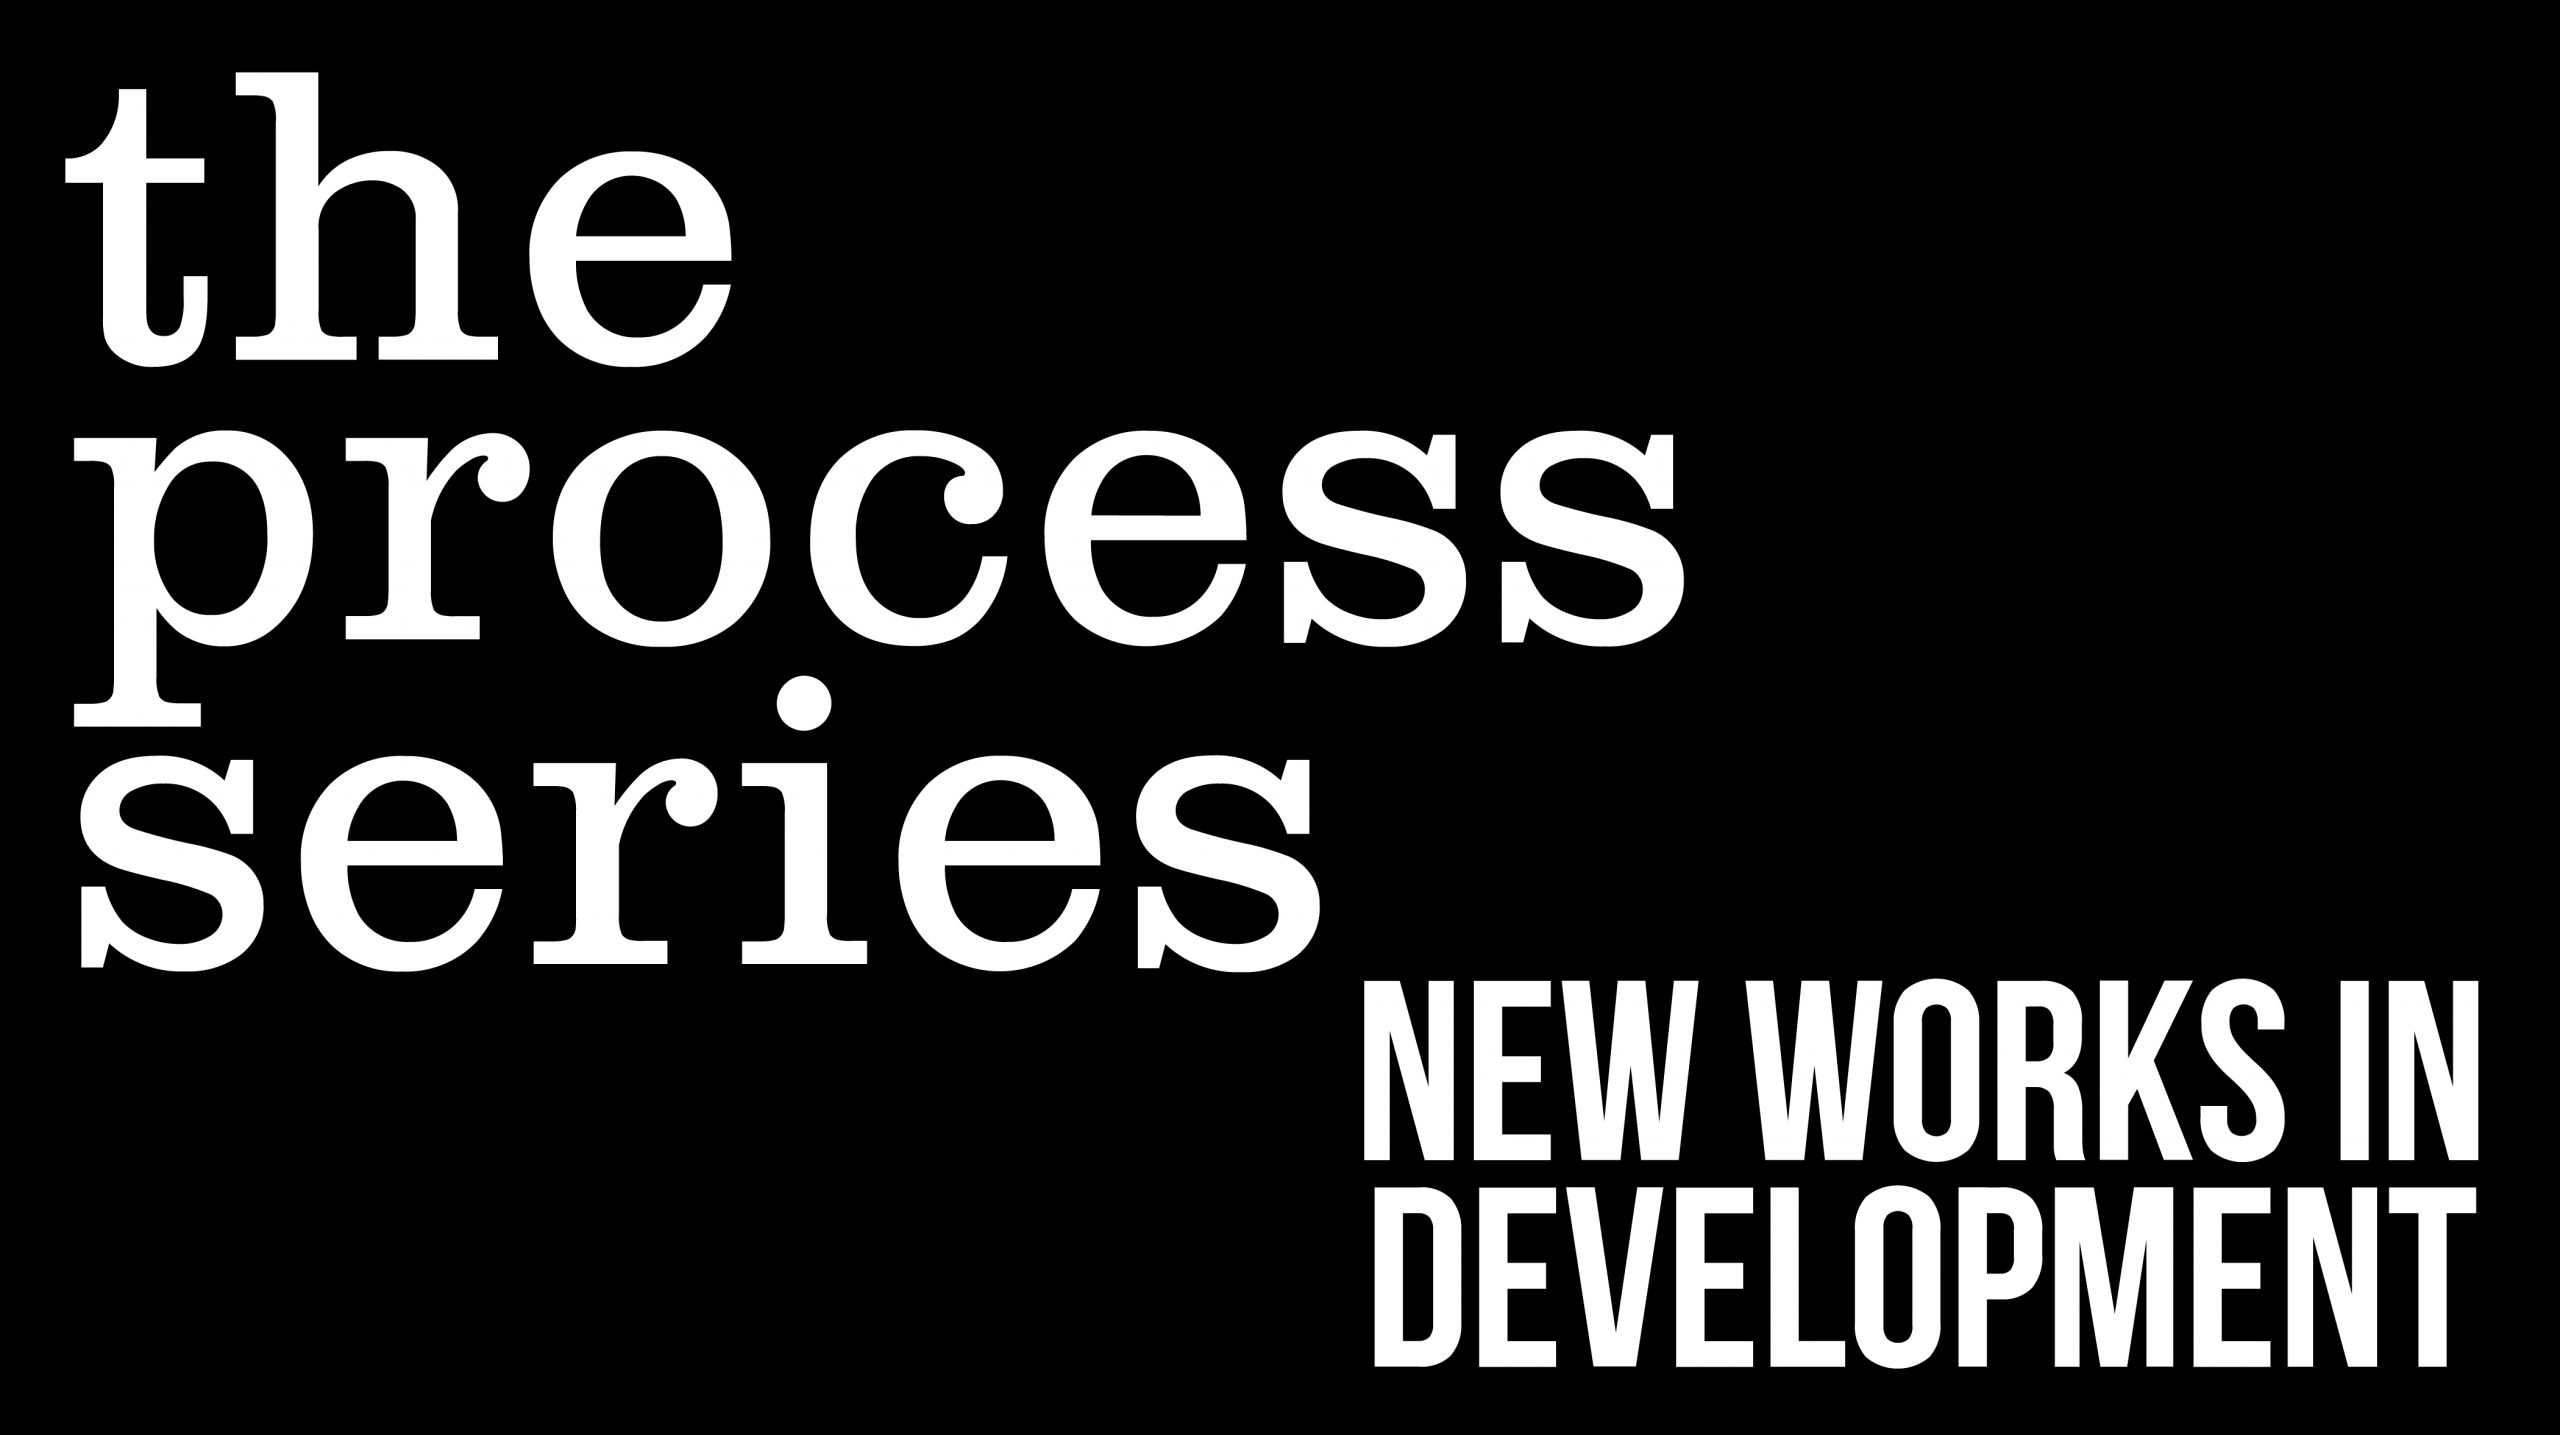 On a black background the words are written in white: "The Process Series: New Works in Development" 